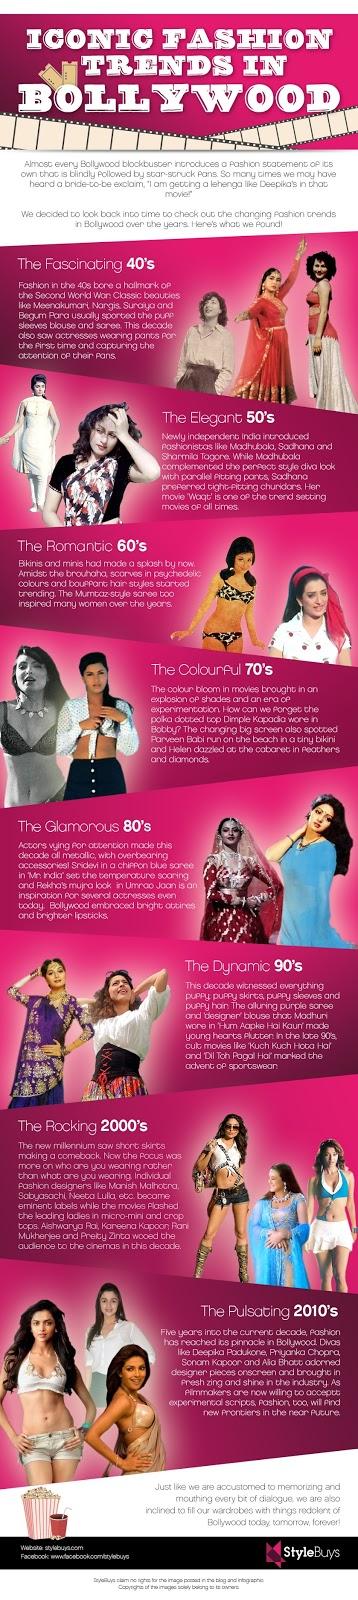 The Style Evolution in Bollywood from Stylebuys